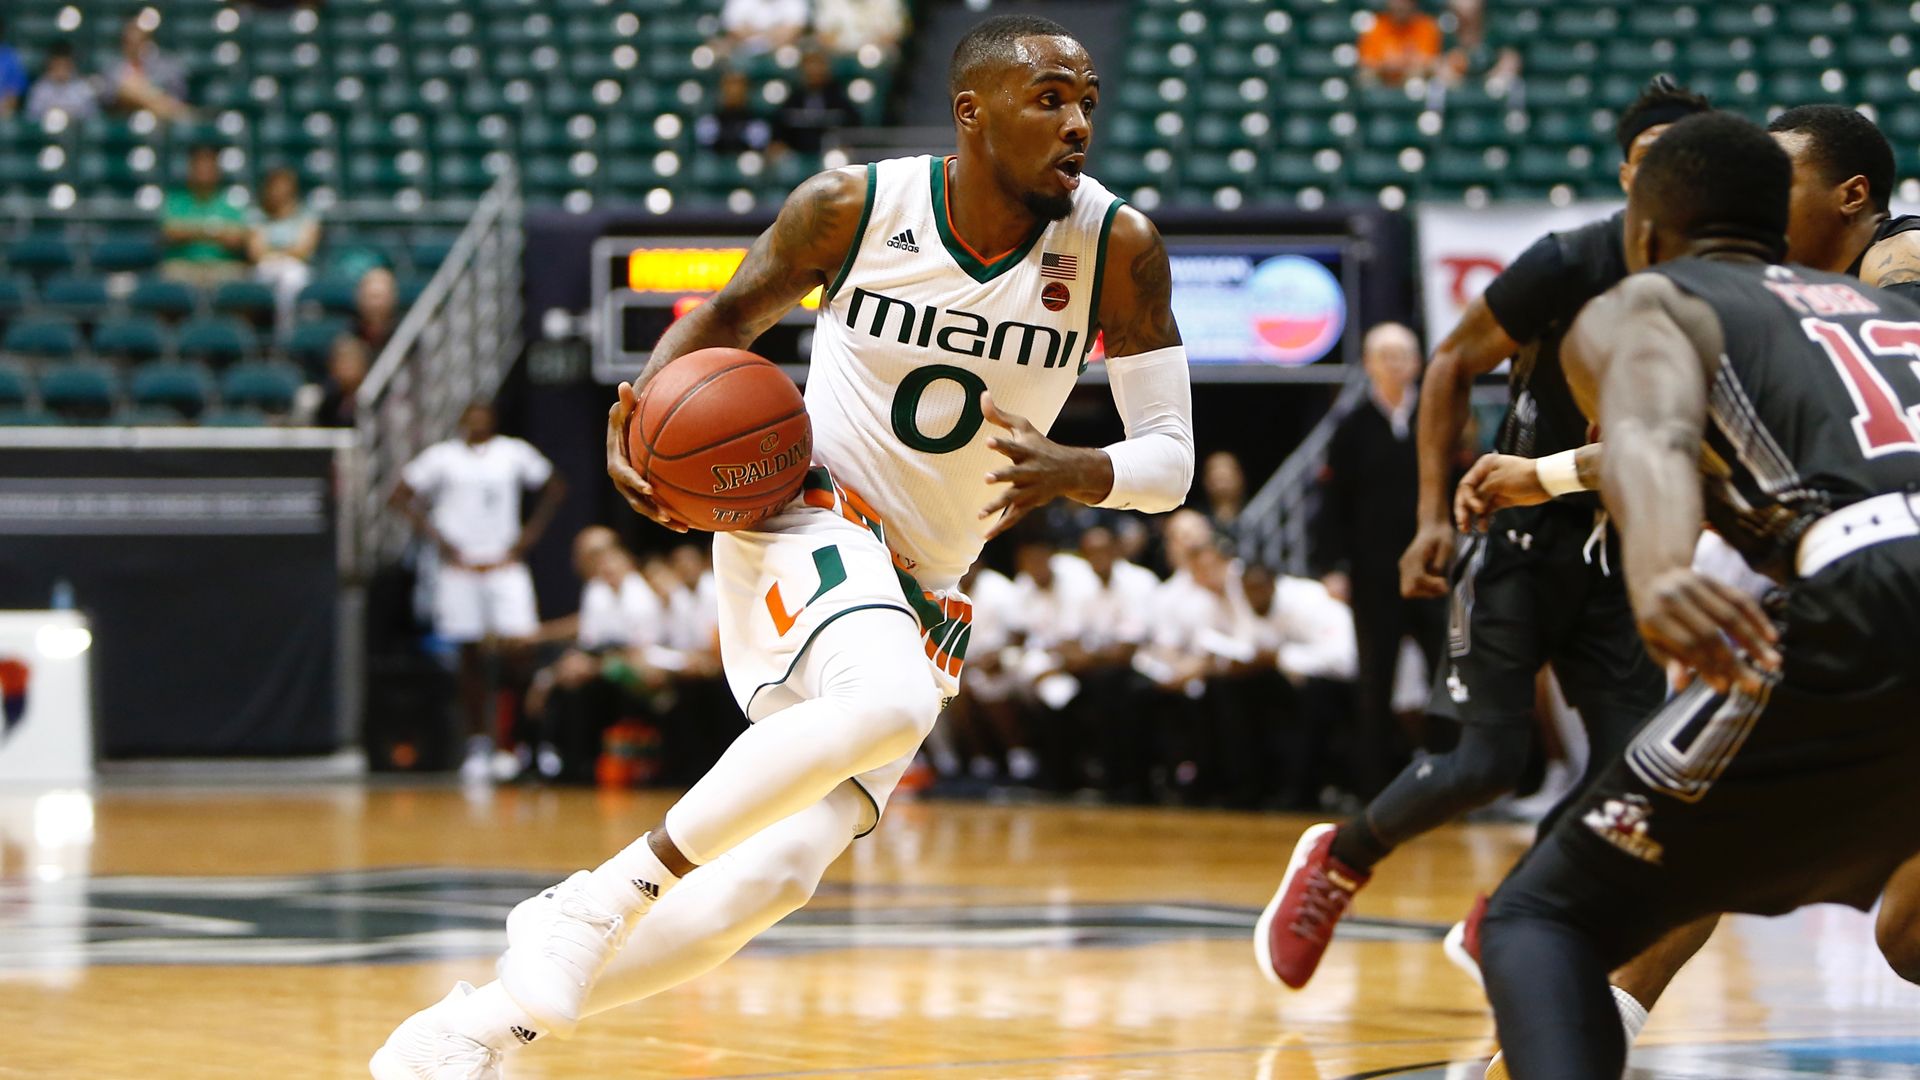 No. 6/7 Canes Fall to New Mexico State, 63-54